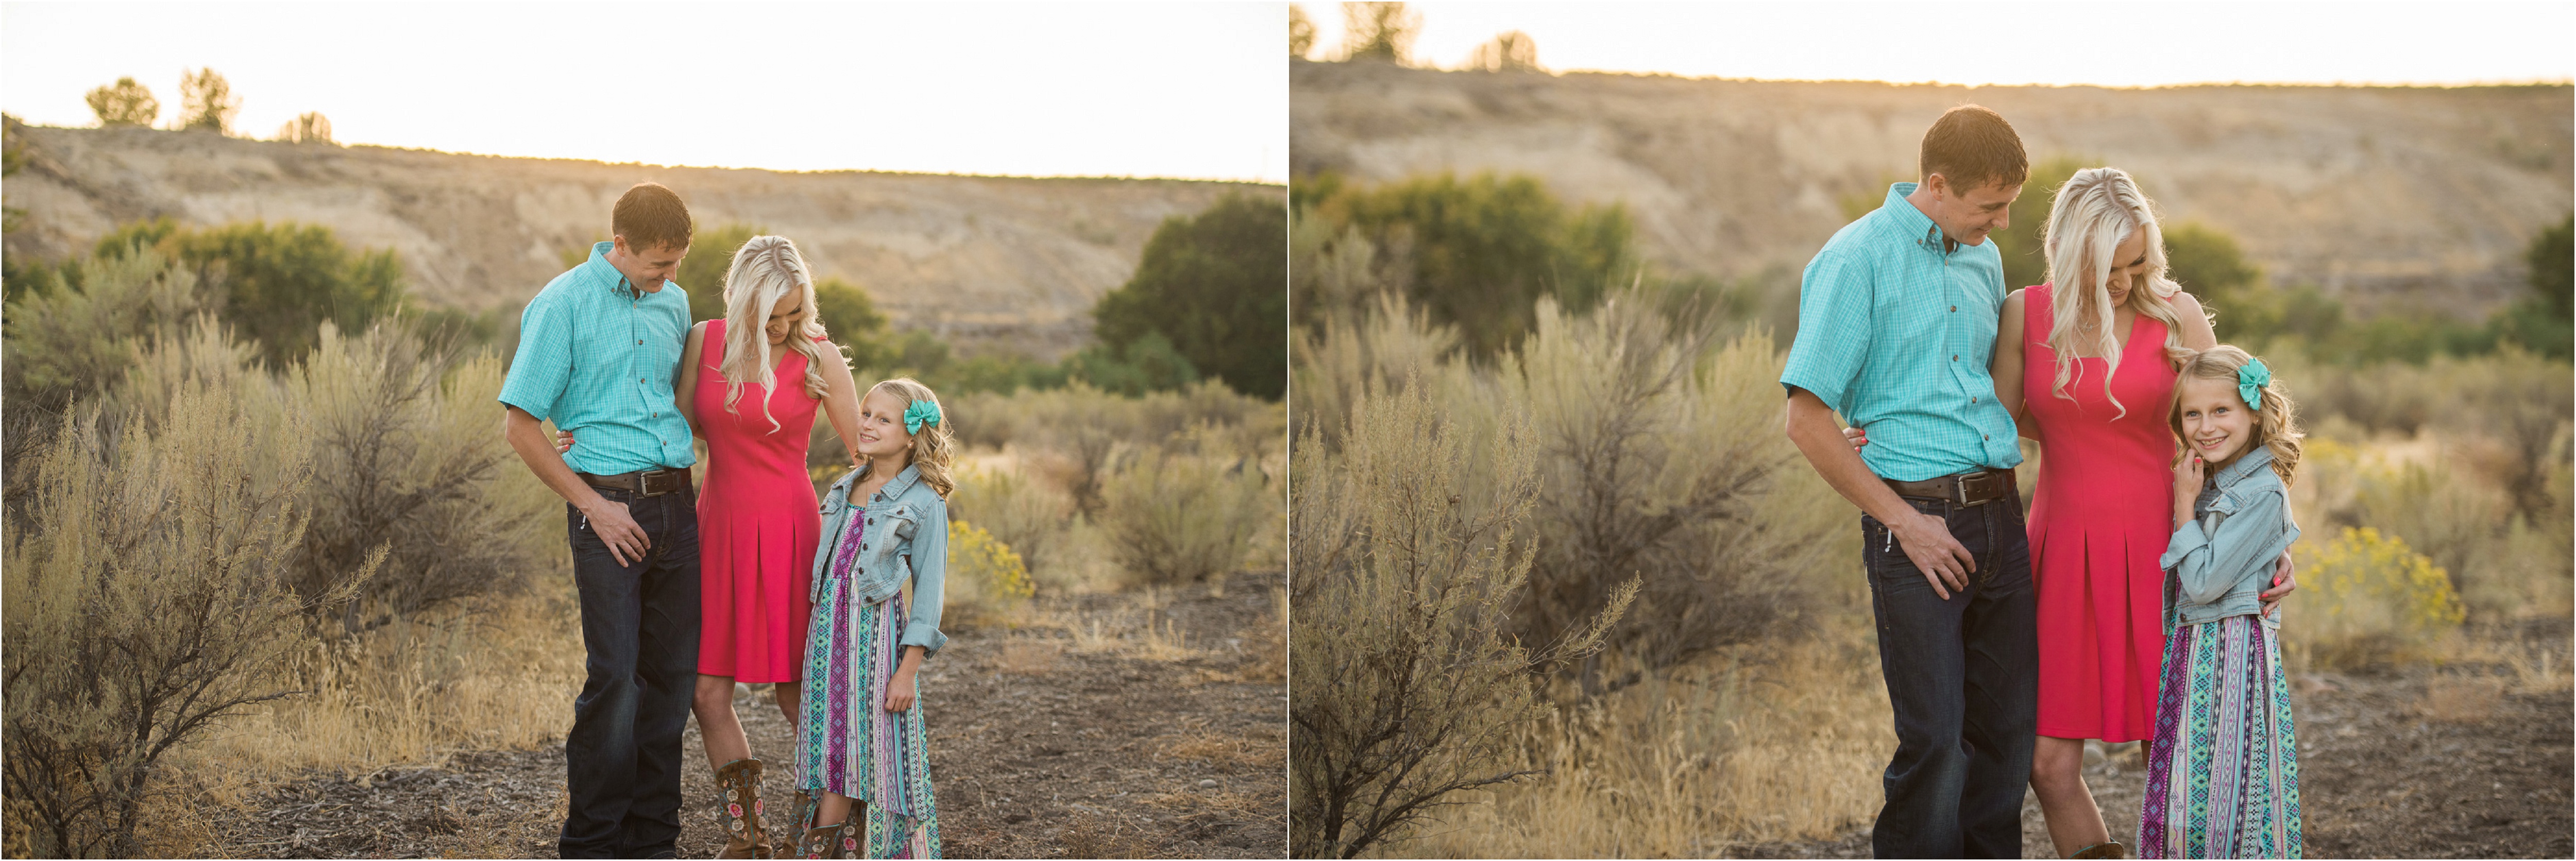 Country Engagement session couple with daughter photo